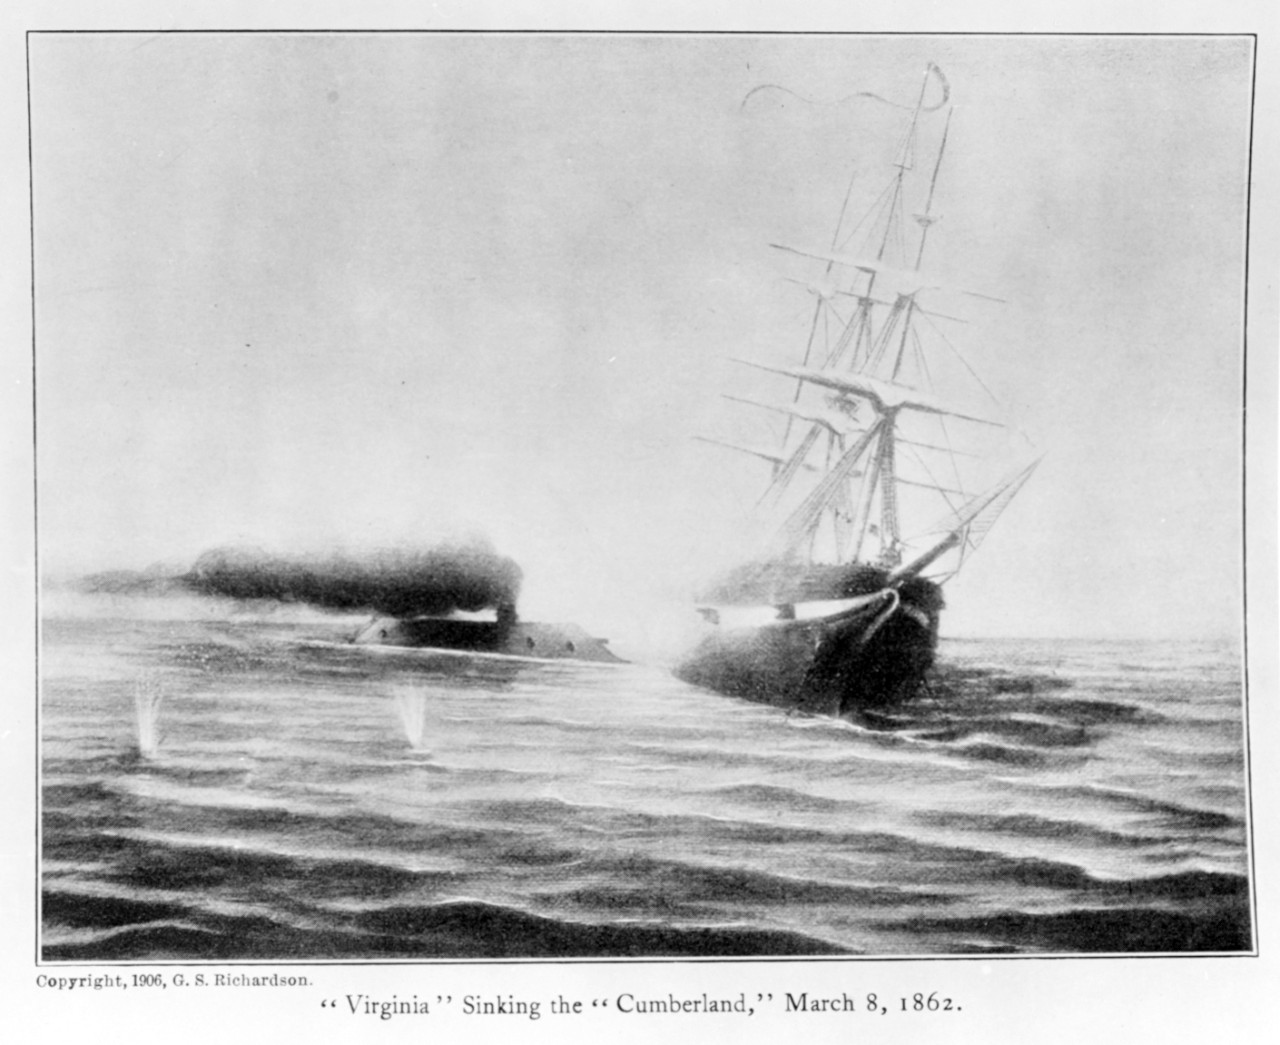 Photo #: NH 59215  CSS Virginia rams and sinks USS Cumberland, 8 March 1862